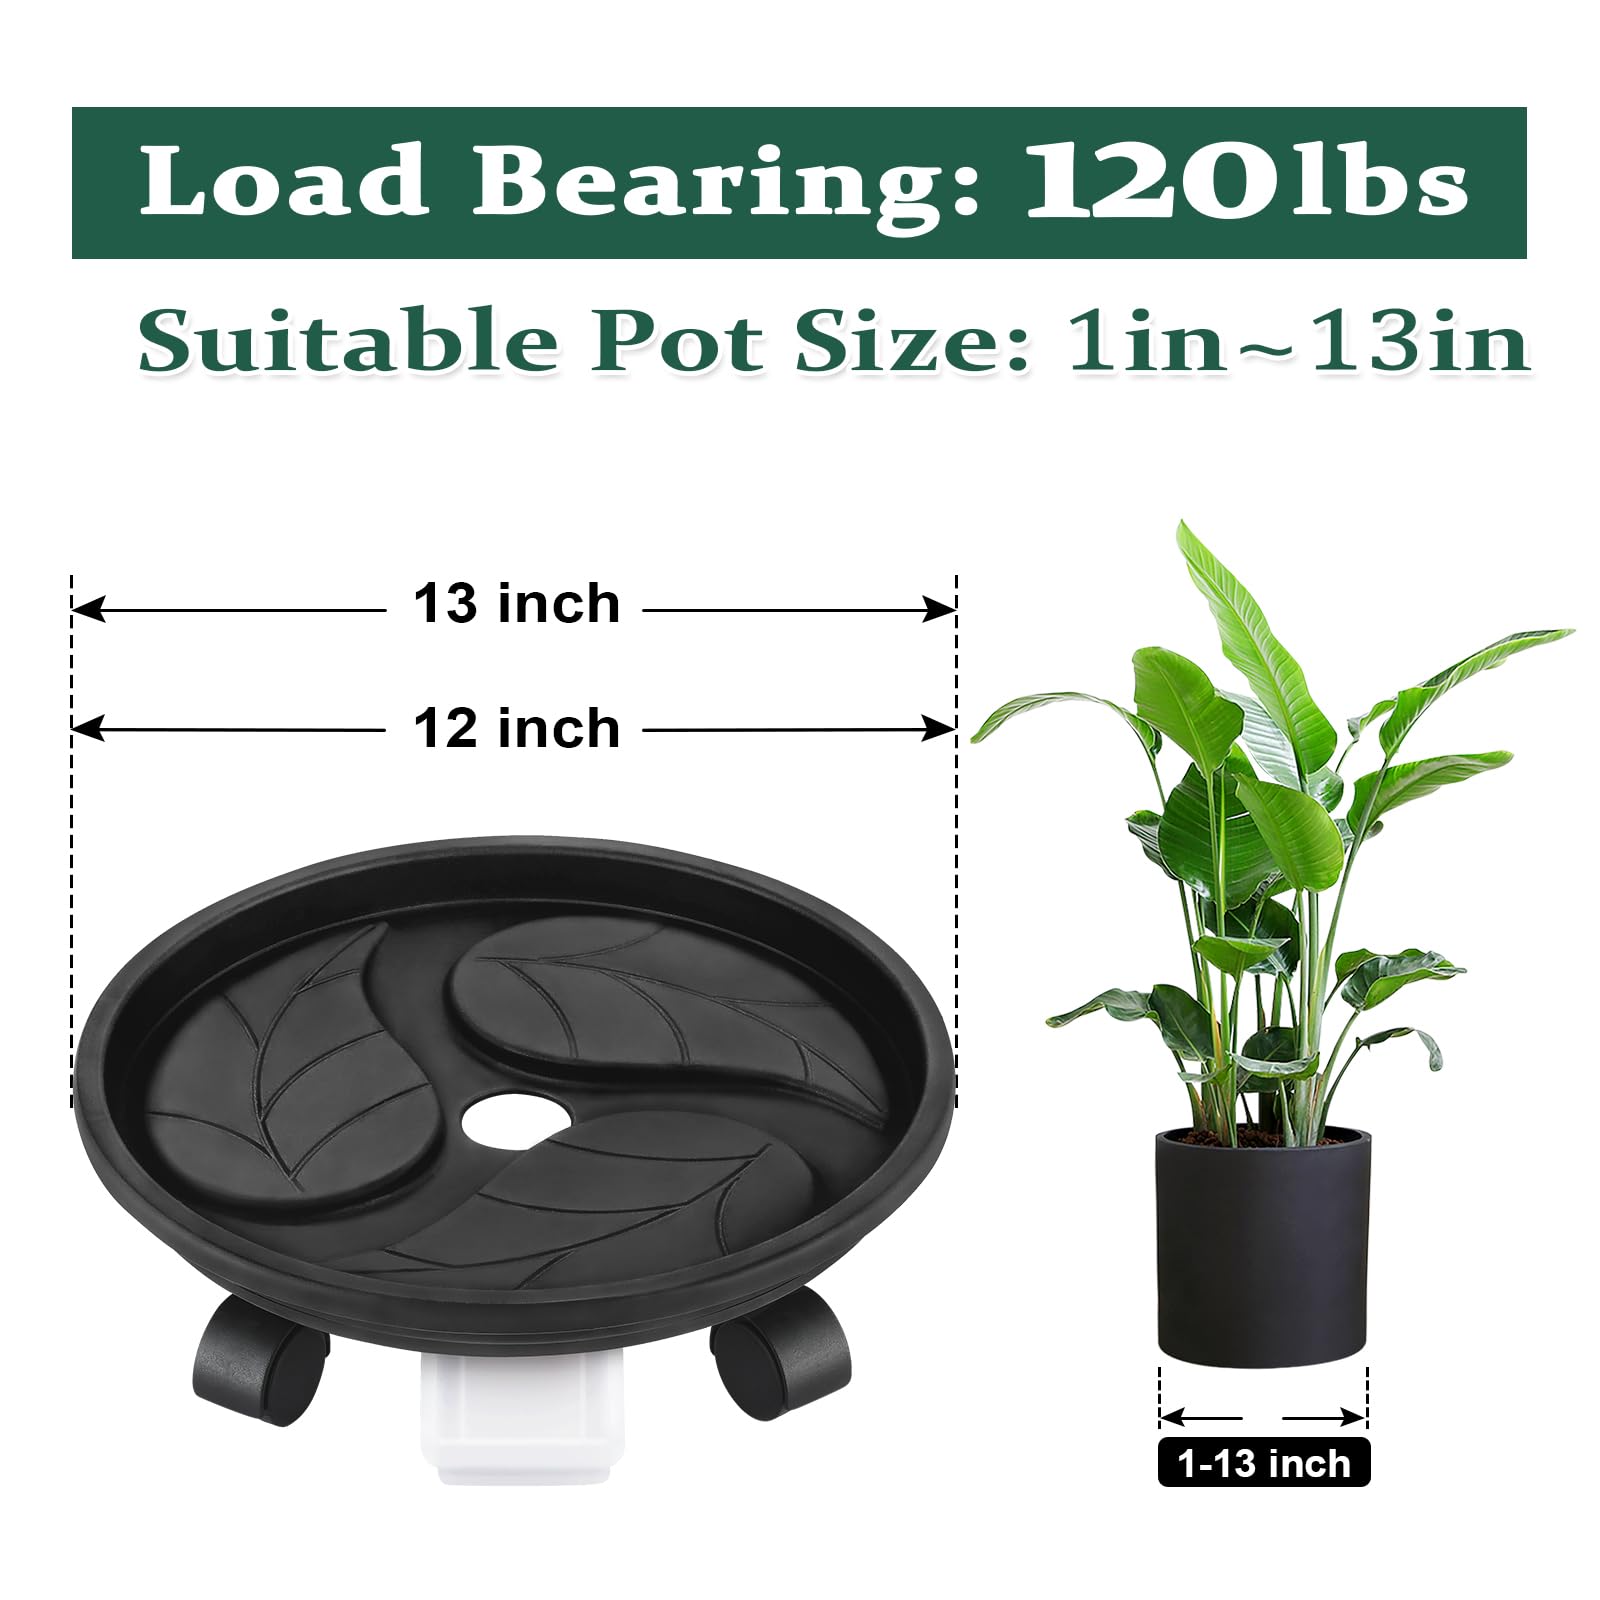 Looca Plant Caddy with Wheels and Drainage Tray, 13”Rolling Plant Stand Flower Pot Mover, Planter Caddies Round Plant Dolly for Heavy Duty Planter, 3 Pack, Bearing 120 lbs (Black)